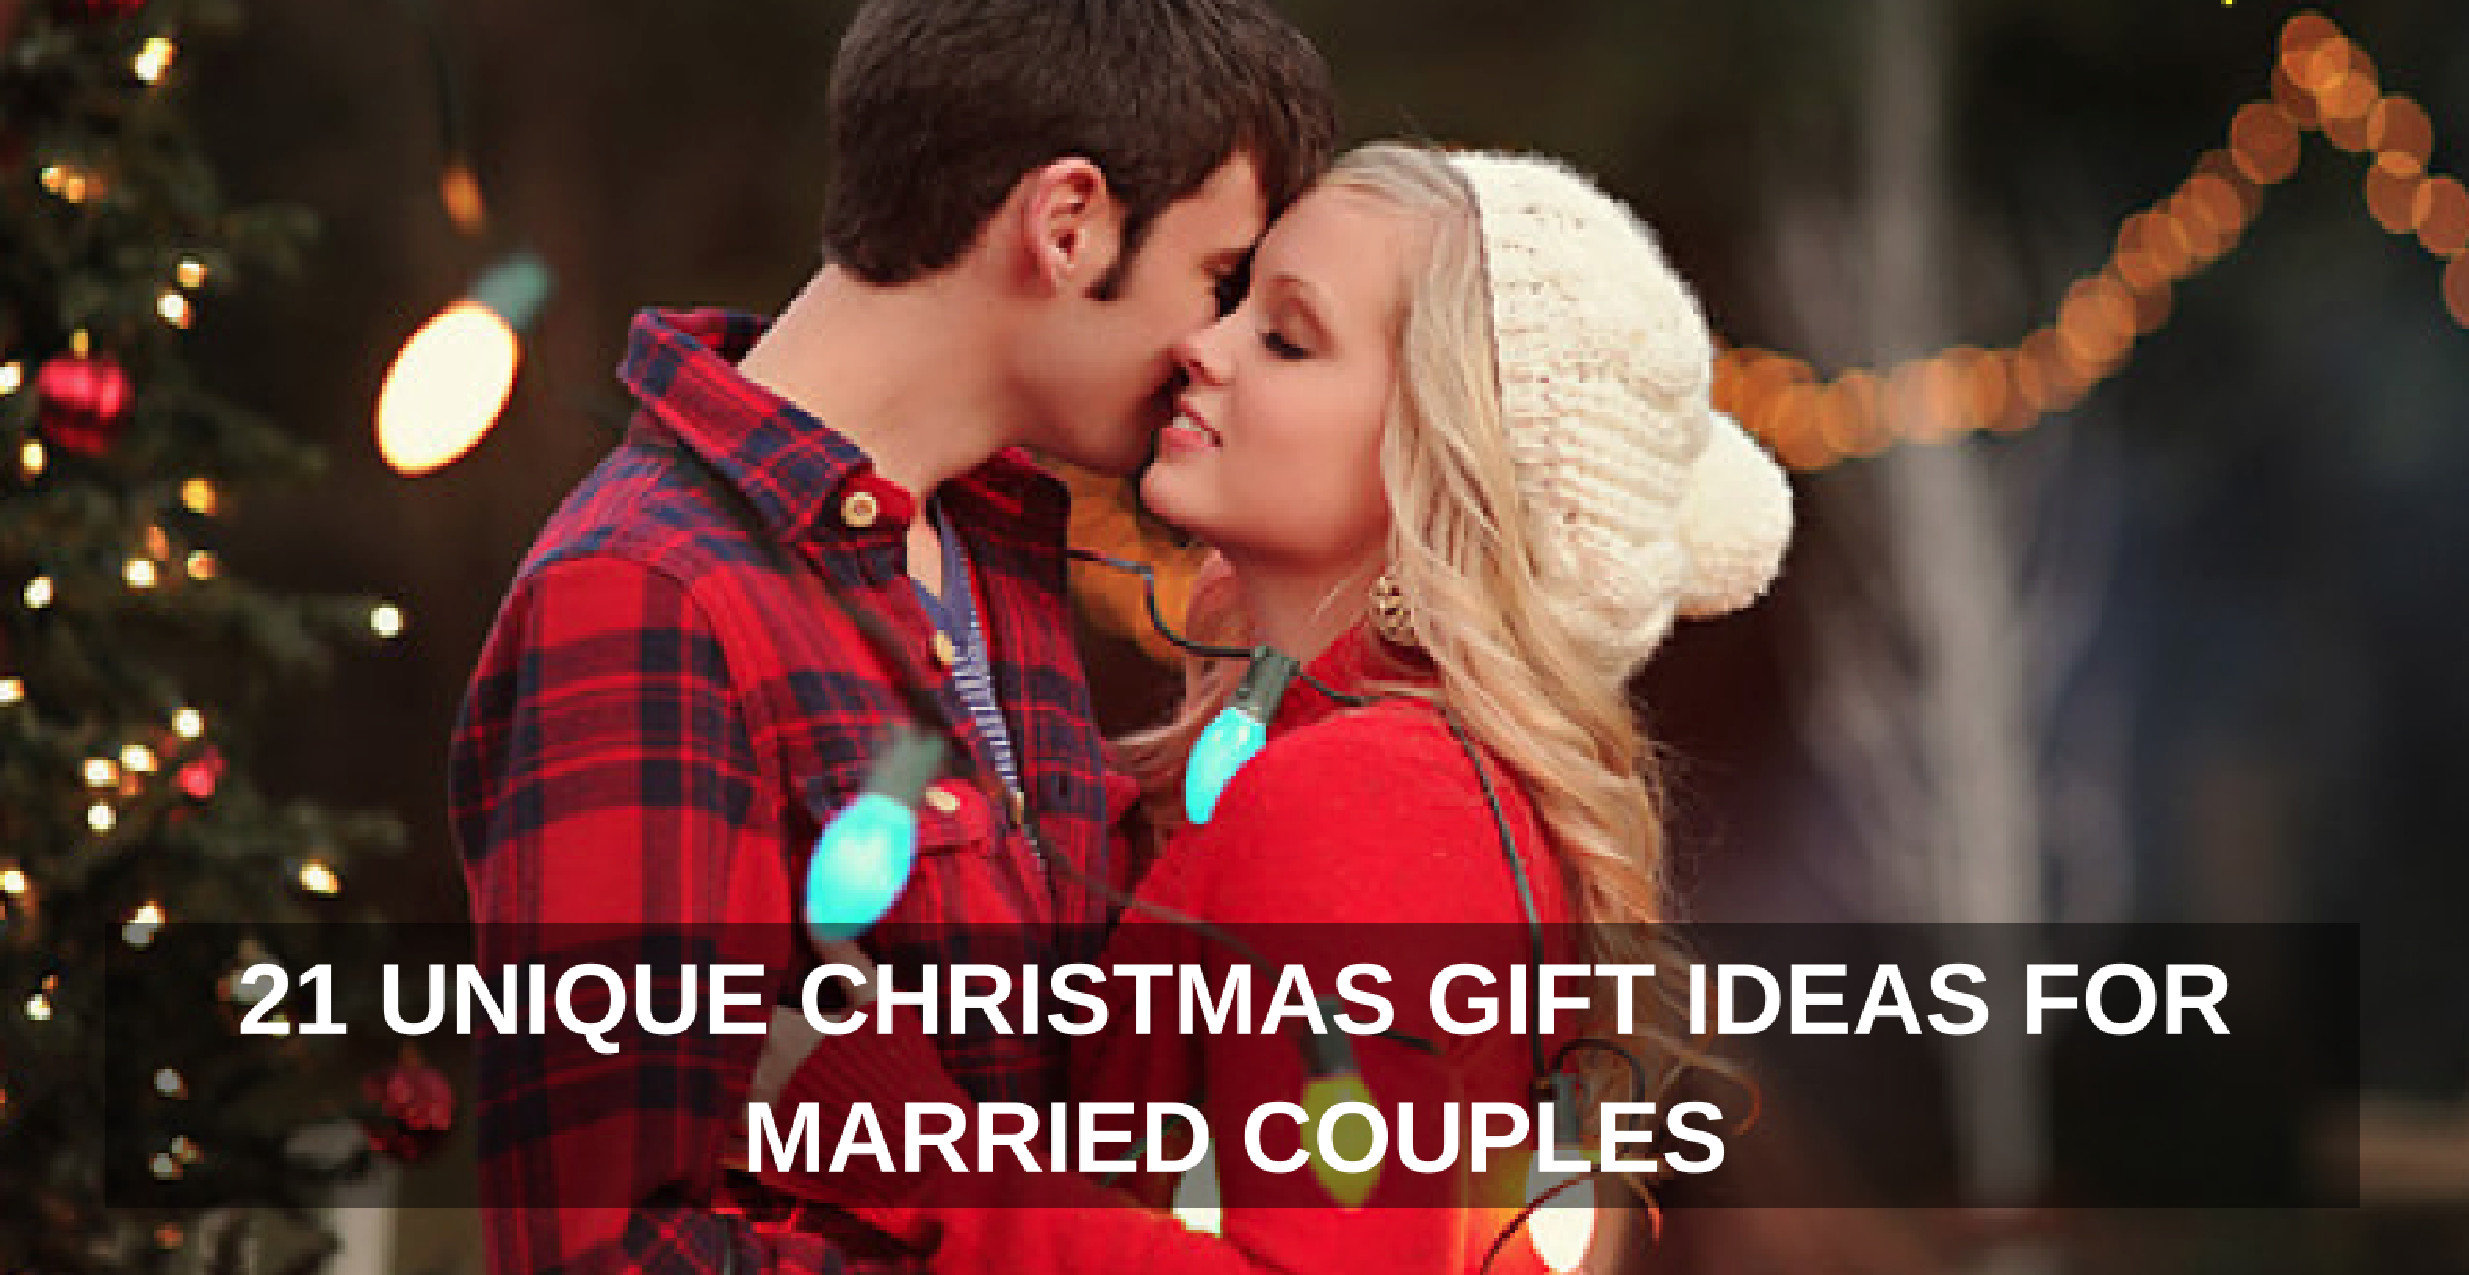 Gift Ideas For Young Couples
 21 Unique Christmas Gift Ideas for Married Couples